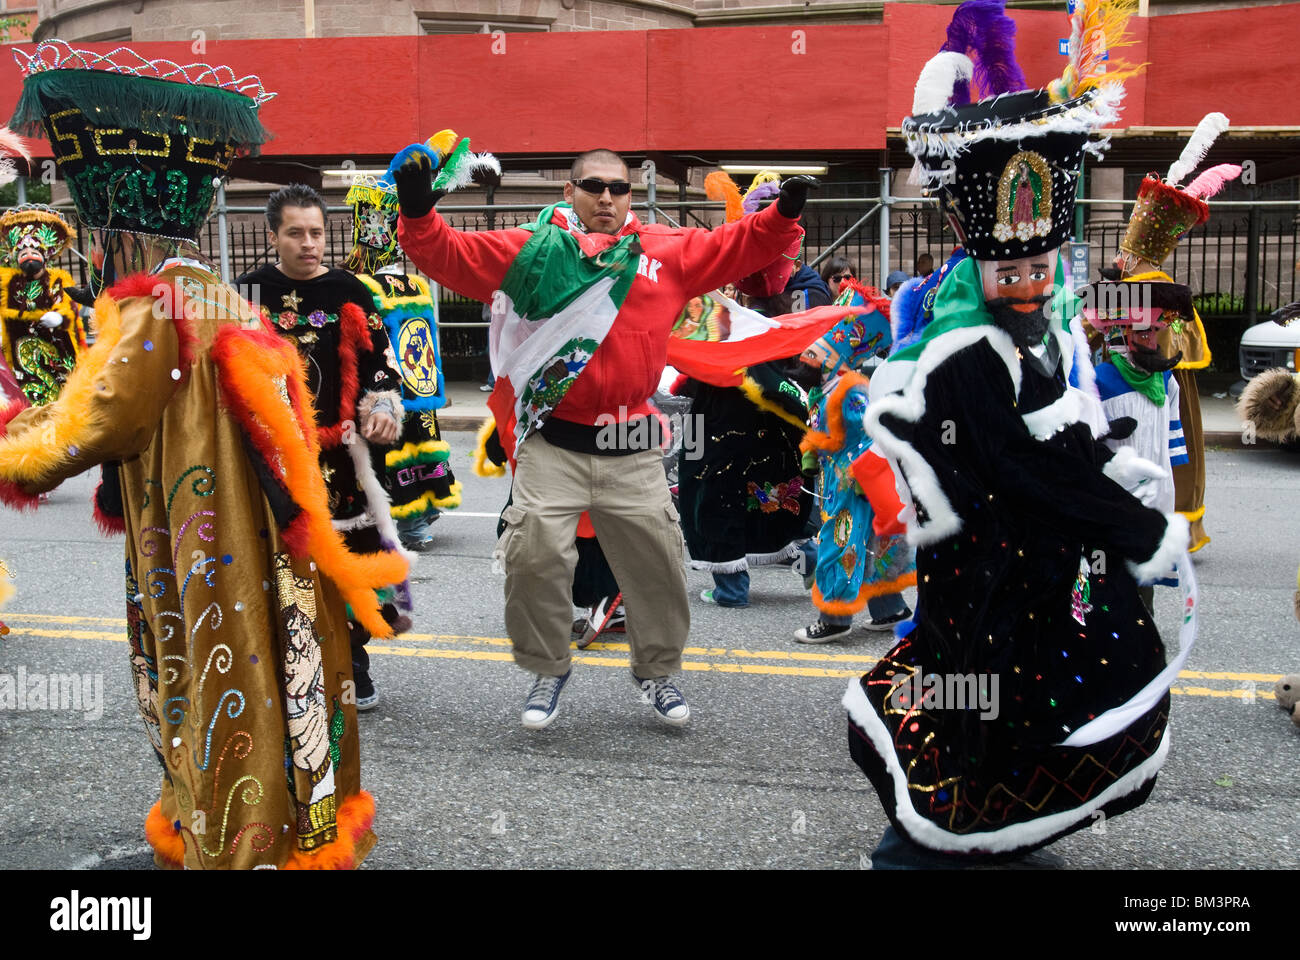 Performers in the Cinco de Mayo Parade in New York on Central Park West